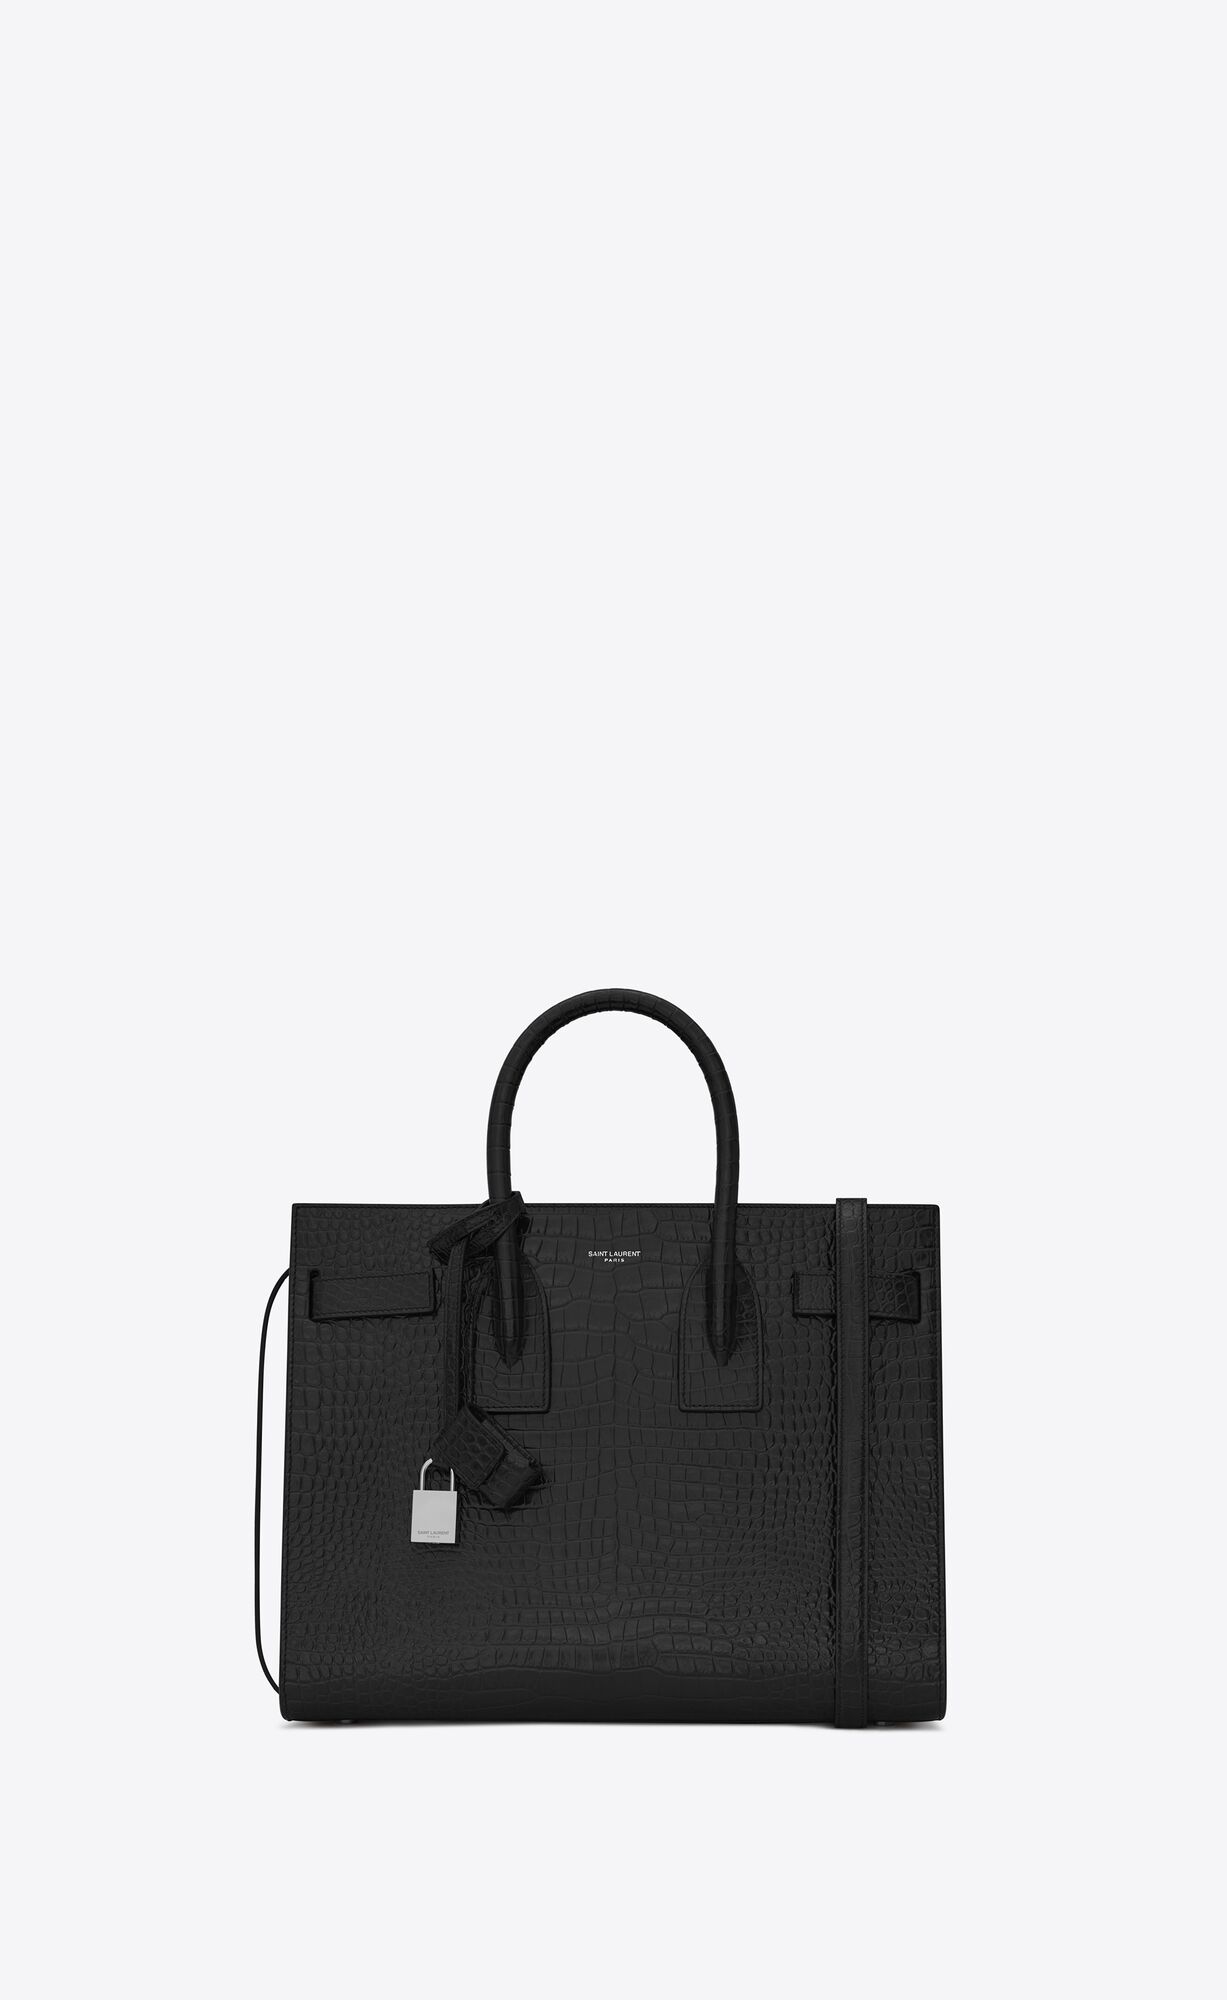 Saint Laurent Classic Sac De Jour Small In Embossed Crocodile Shiny Leather – Black – 378299DND1N1000